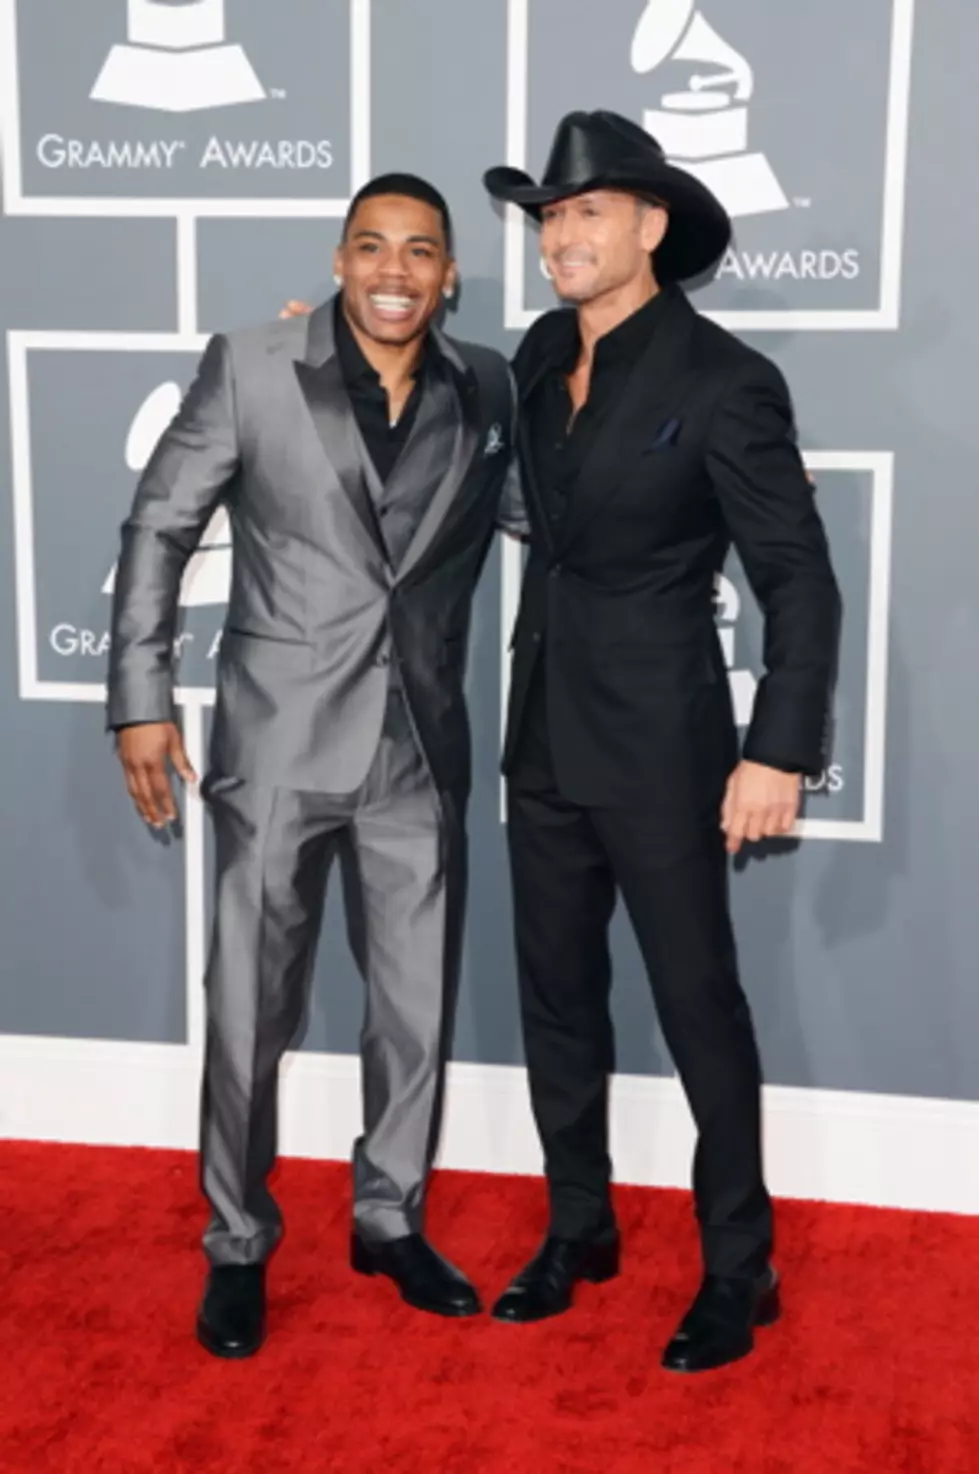 Tim McGraw Can Rap, Nelly Reveals